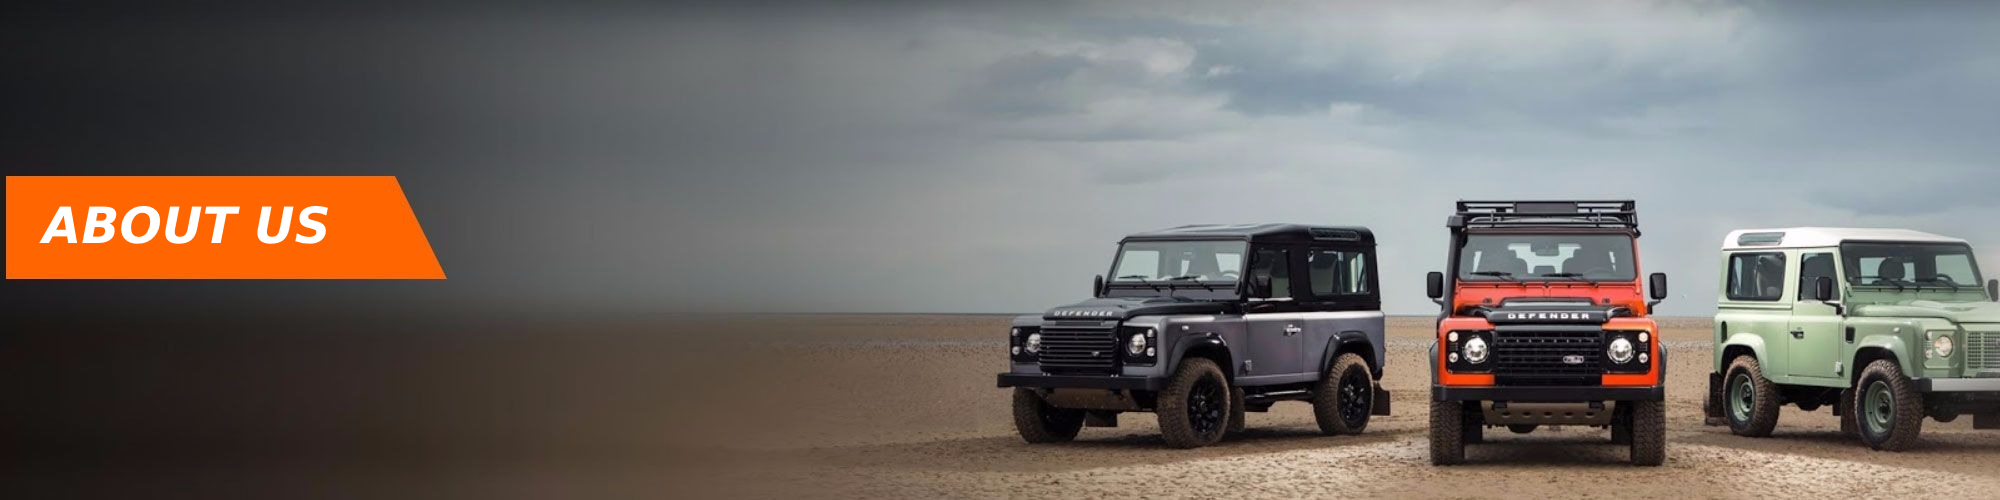 About Gloucester Landrover